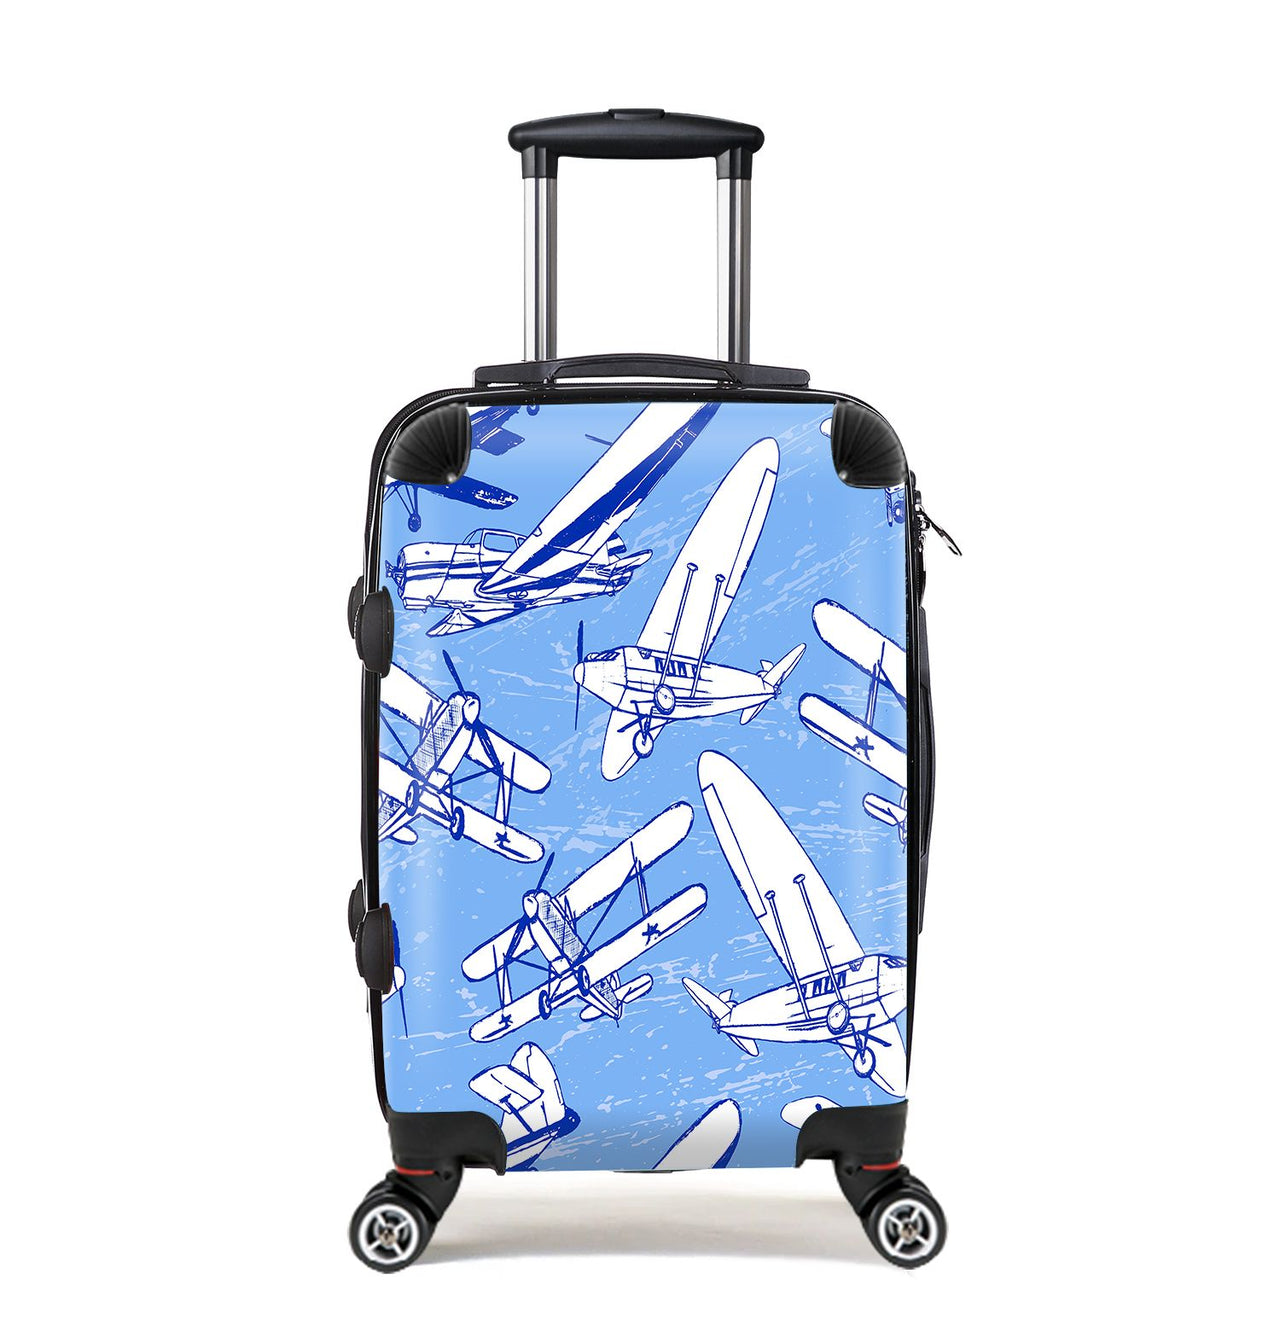 Retro & Vintage Airplanes Designed Cabin Size Luggages